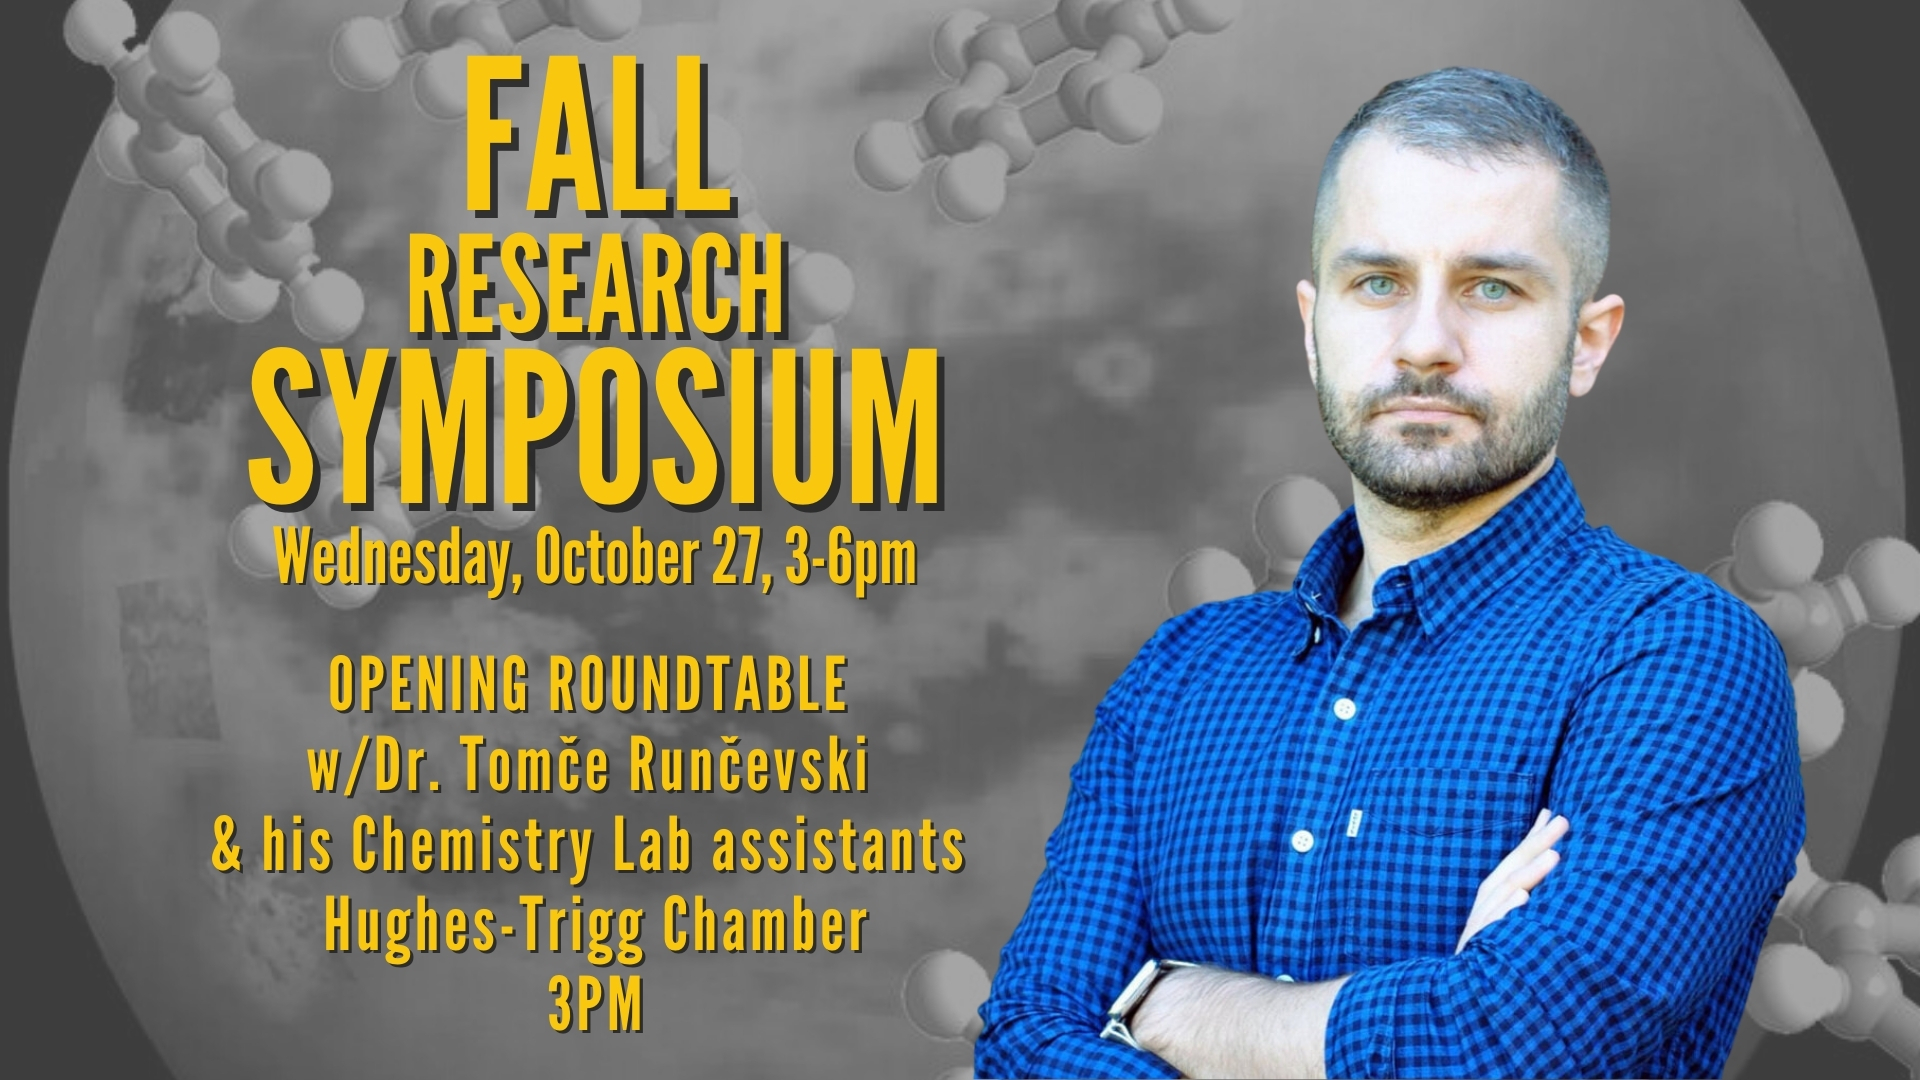 Flyer for the 2021 Fall Research Symposium keynote talk with Dr. Tom Runcevski